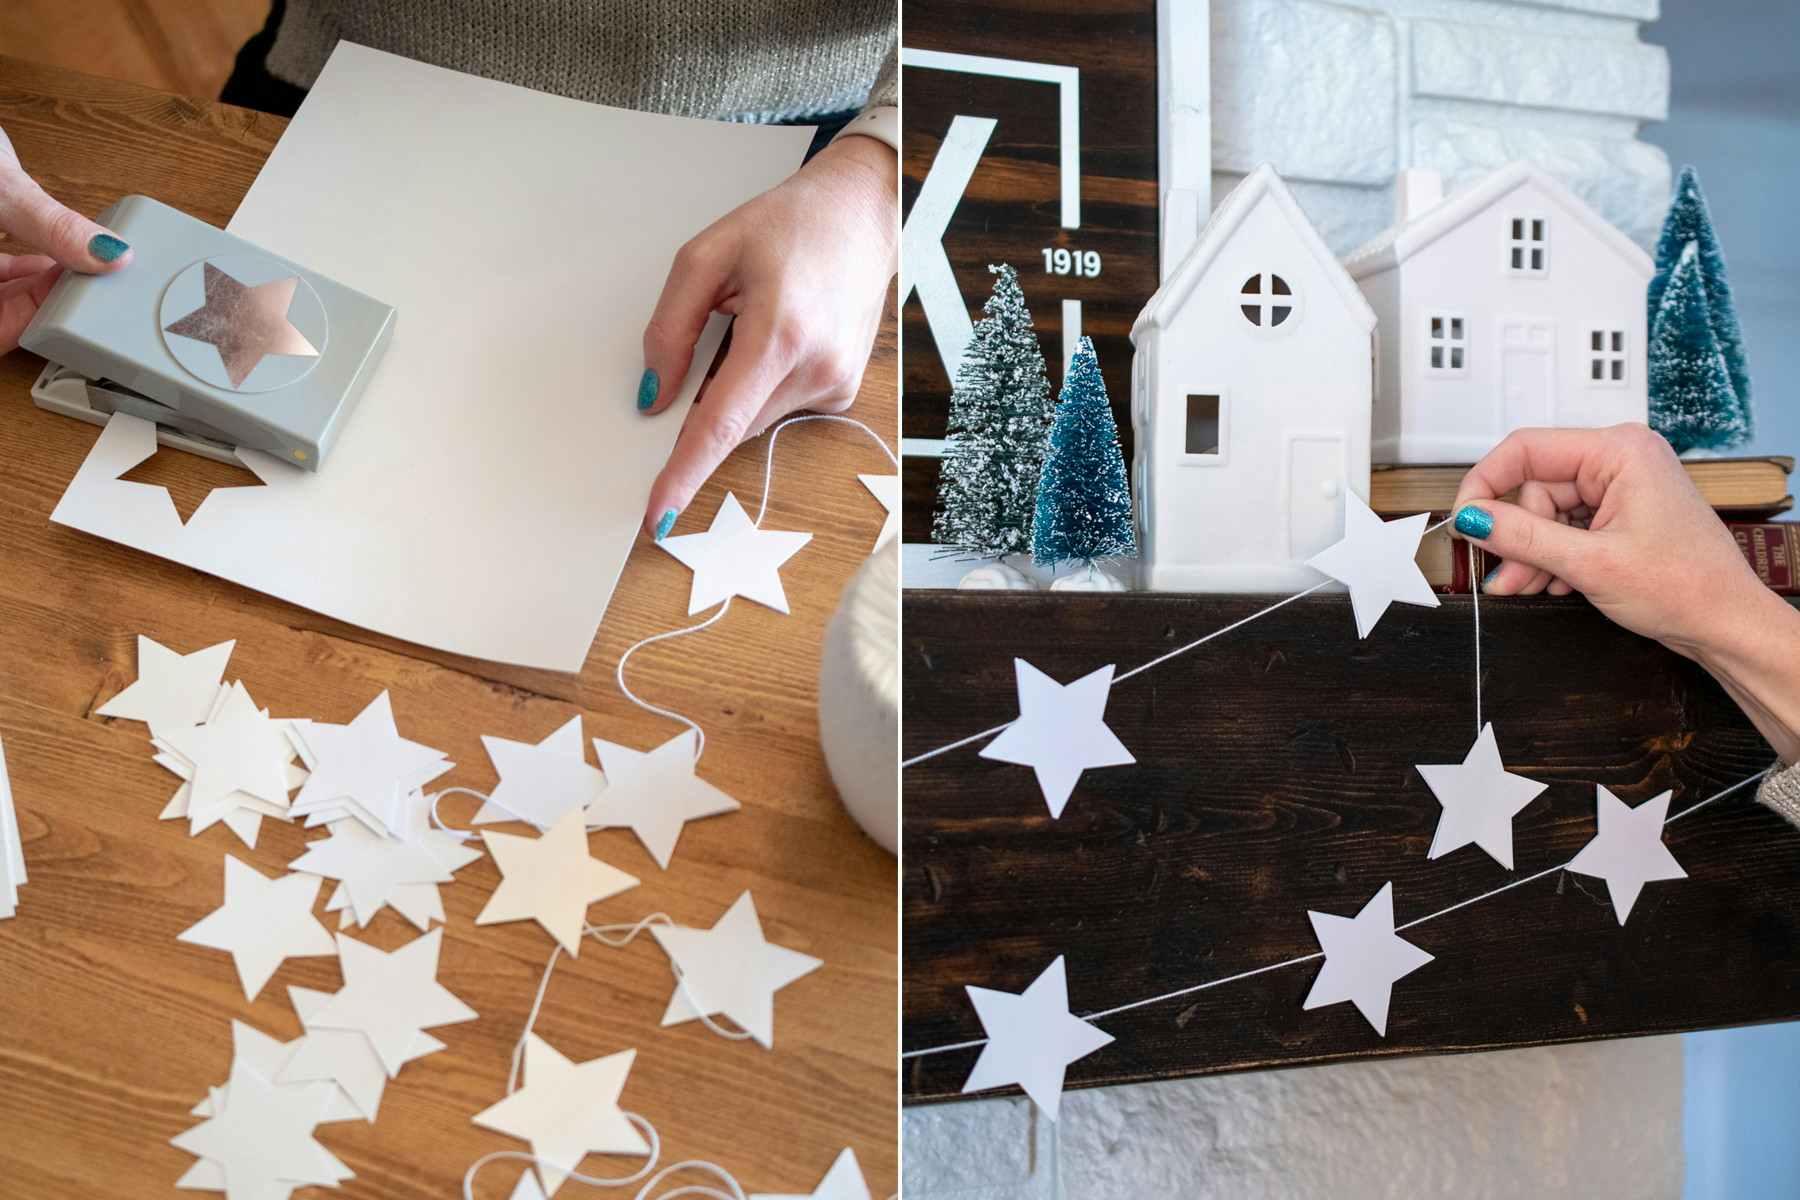 White paper stars being punched from a piece of paper and hung on a mantel with string.